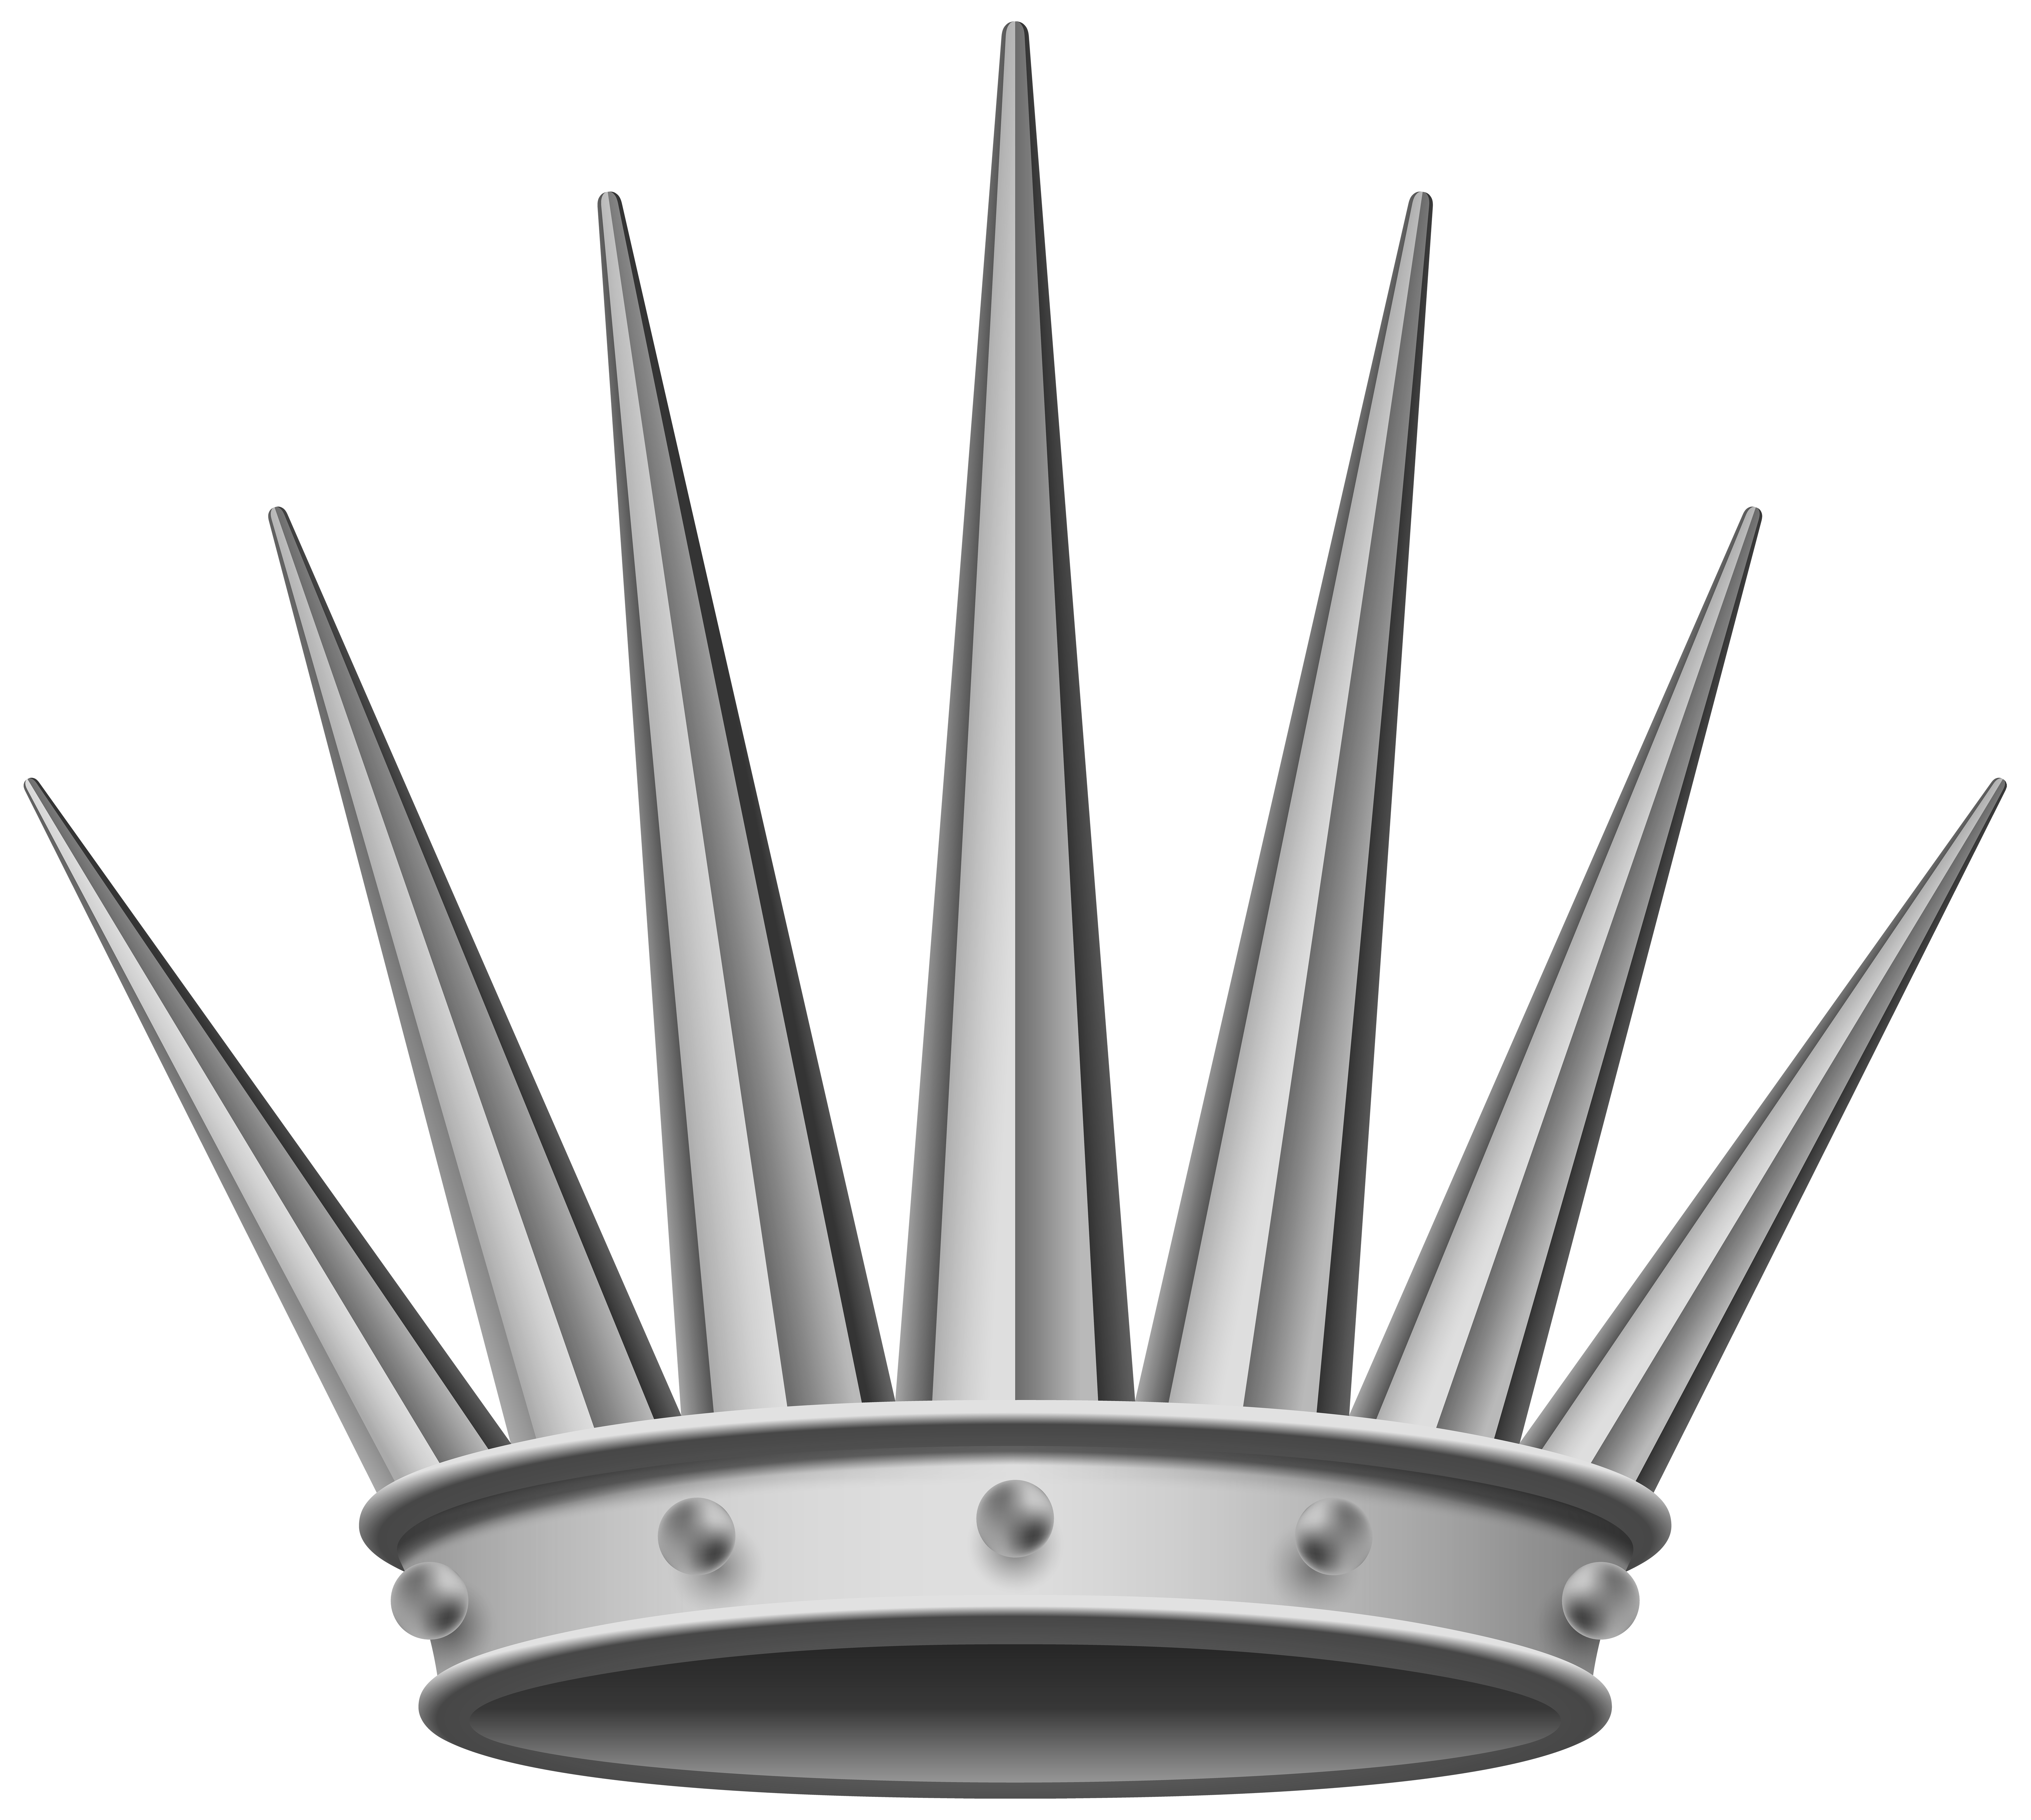 silver crown png